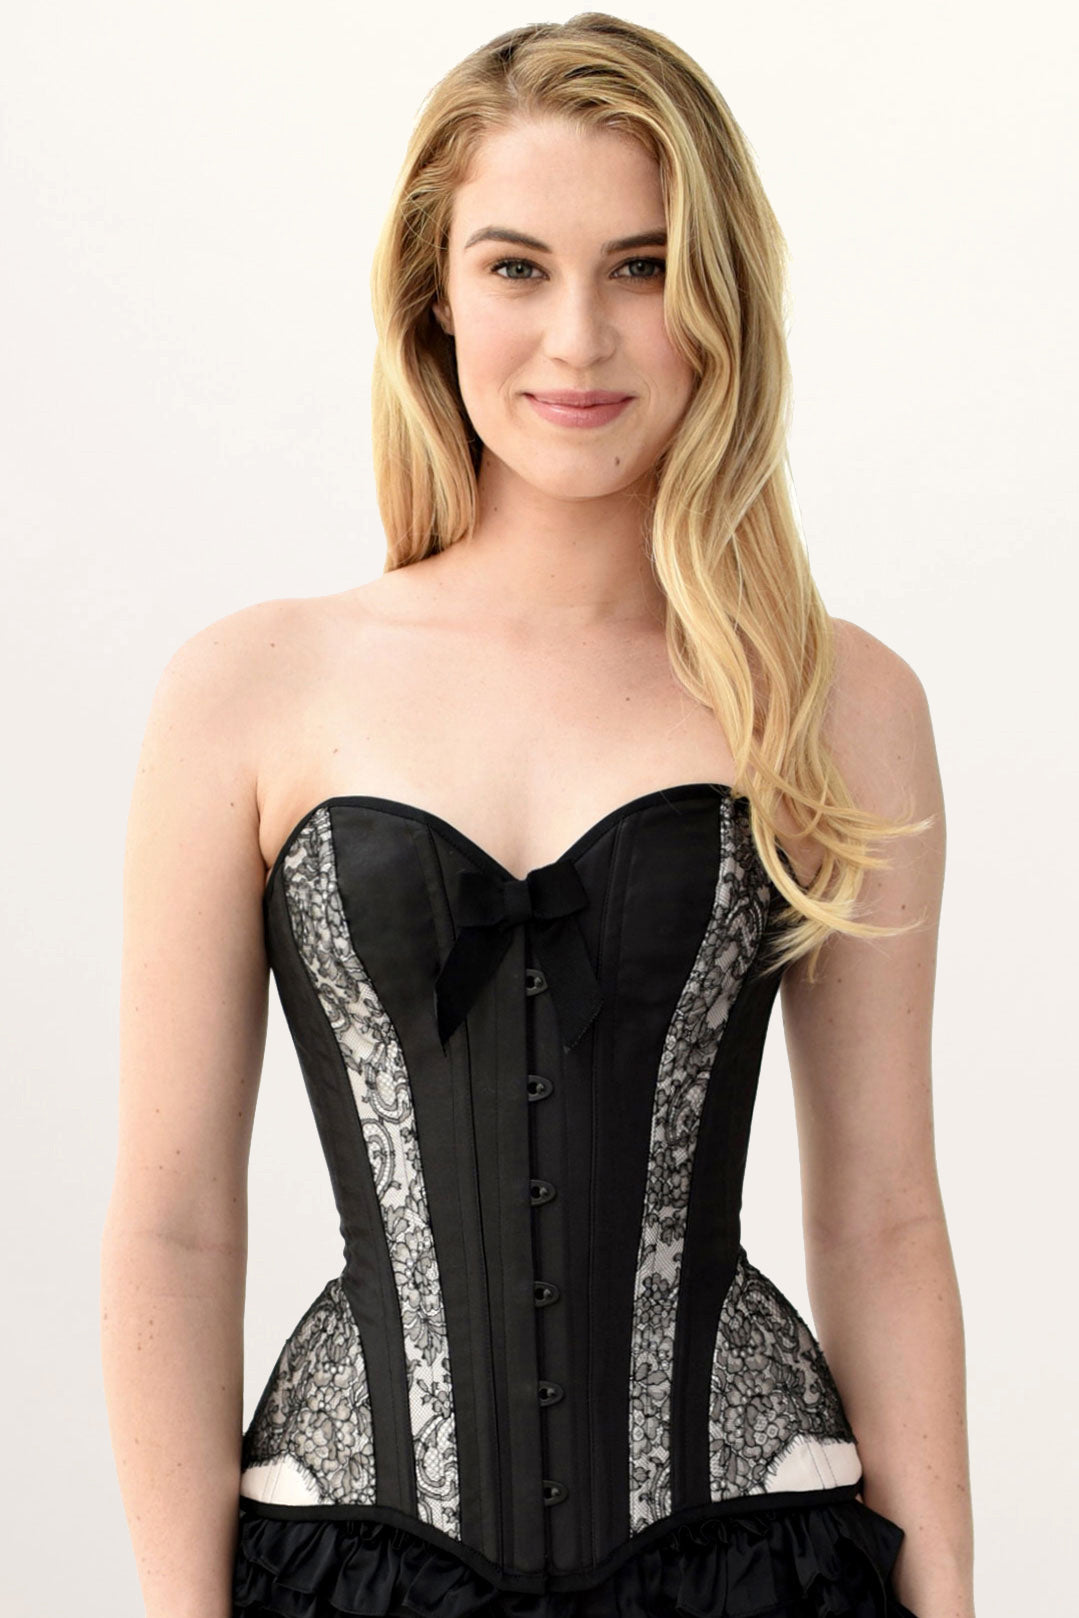 Angela Friedman Clair de Lune corset in black silk with French lace overlay, handmade in the UK